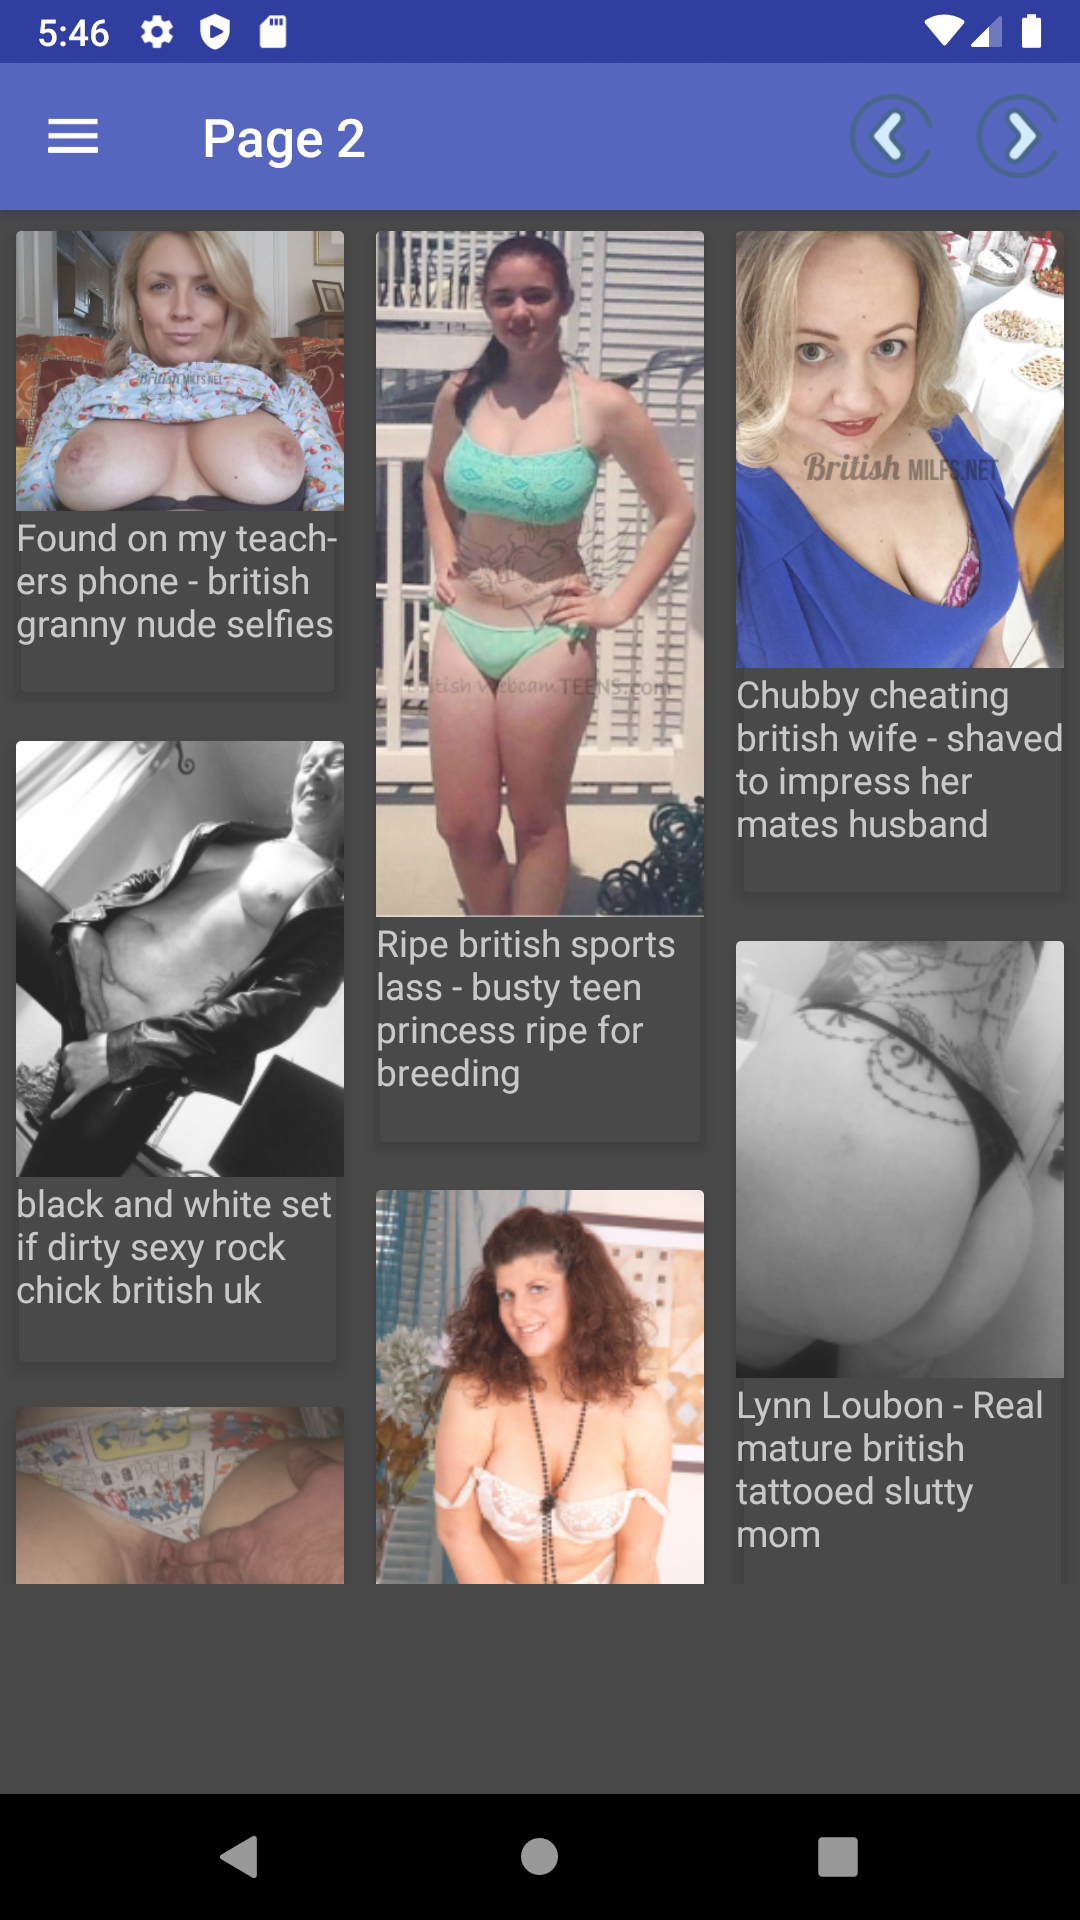 British Porn apps,android,app,hentai,best,apk,photo,sexy,lane,pornstars,pictures,perfectshemales,gallery,pict,rated,caprice,lily,galleries,hot,pics,manga,porn